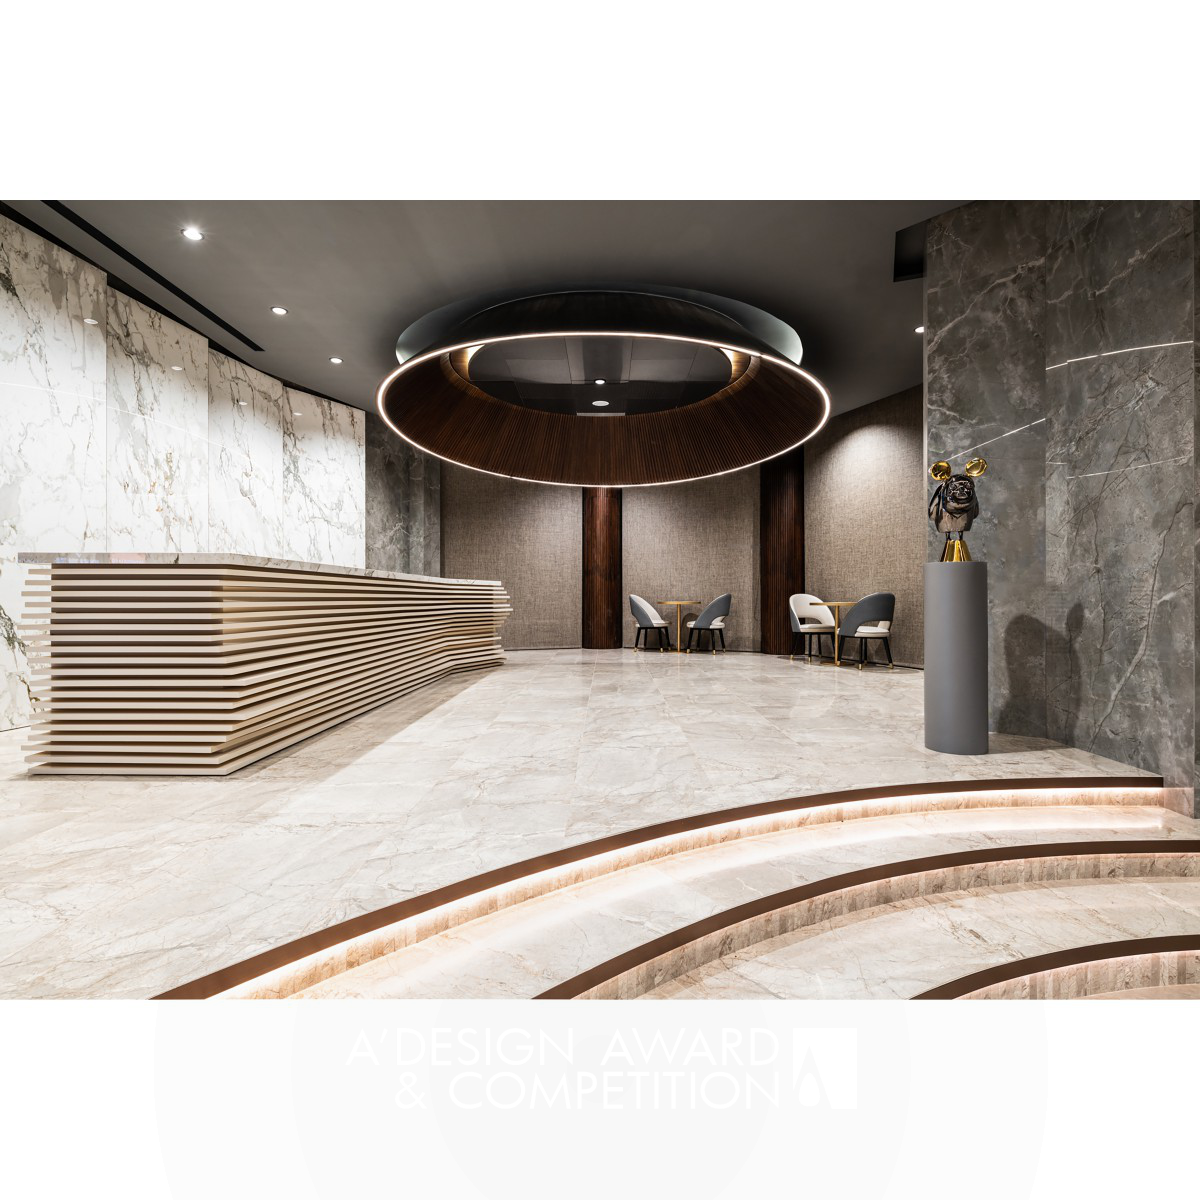 Champion Living: A New Generation Tile Showroom